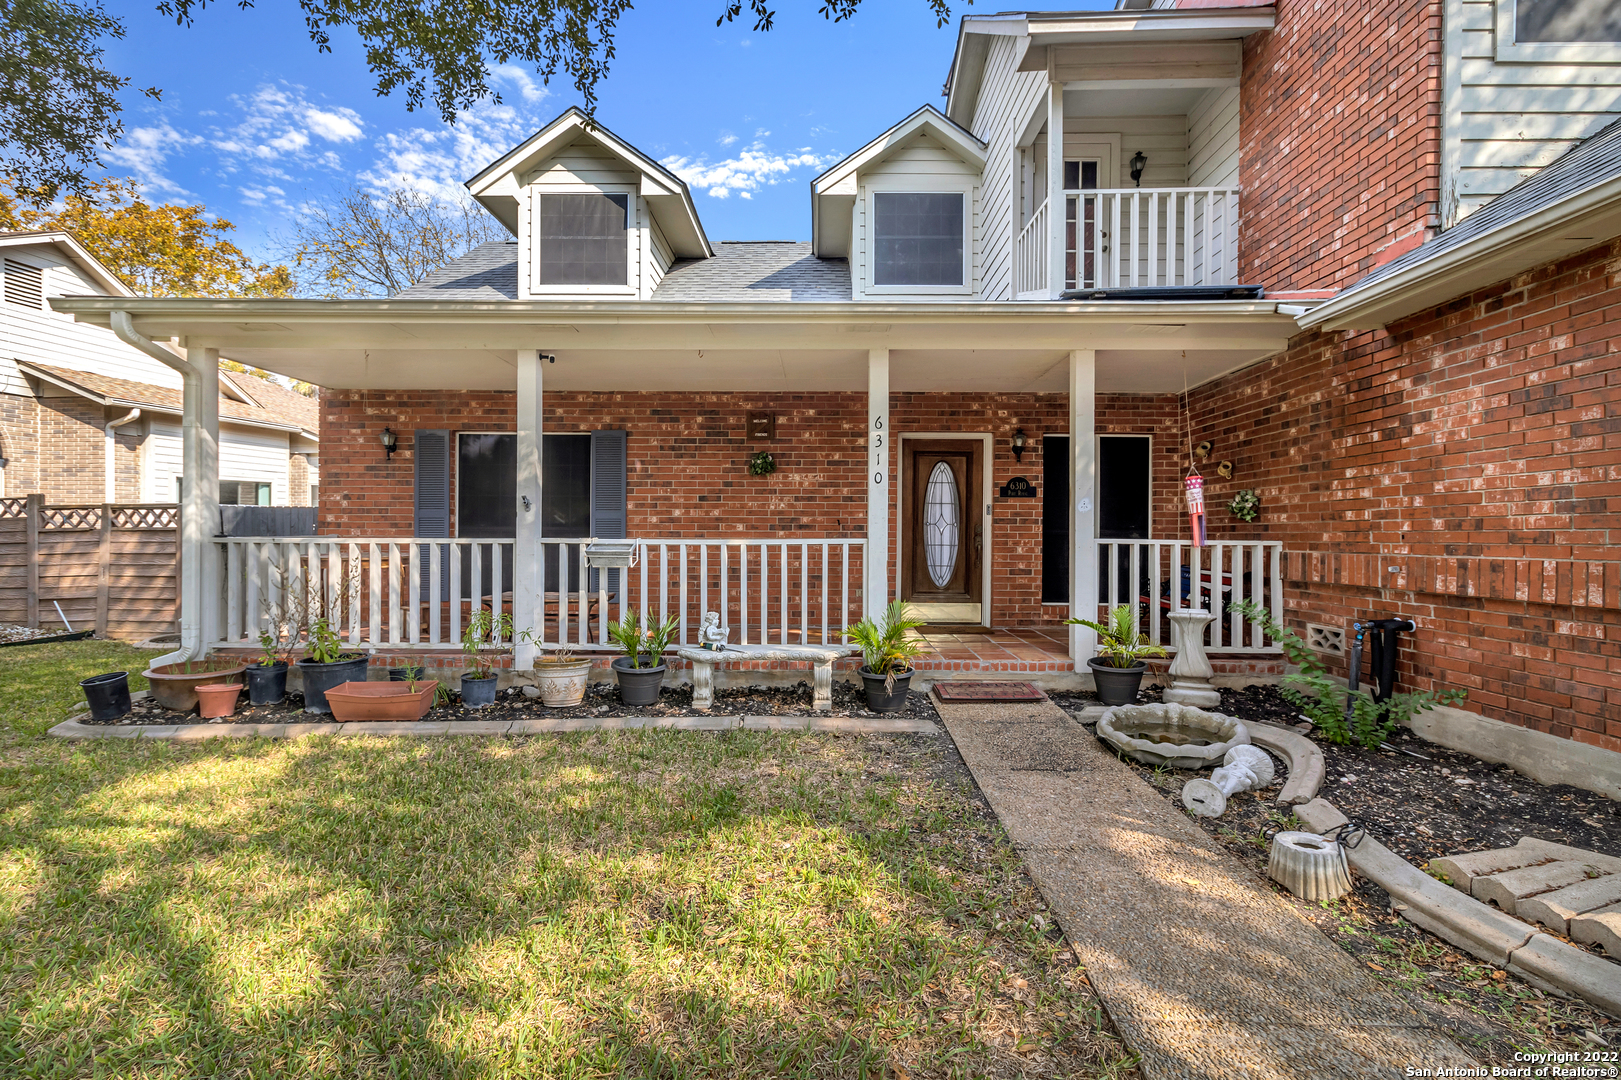 CHARMING 2800 SQ FT 2 STORY HOME W/SOLAR PANELS & ABOVE GROUND POOL W/DECK!! 4-SIDE BRICK W/LARGE FRONT YARD AND TILED FRONT ENTRY PORCH. CVD/SCREENED IN PATIO IN BK YRD/STORAGE BLDG/LARGE FAM ROOM W/HIGH CEILS/BRICK FRPLC/WET BAR/EAT-IN KTCHN W/ISLAND/GRANITE CNTRS/WALK IN PANTRY. MASTER DOWN W/SITTING RM/STUDY, BATH W/DBL VANS/WHRLPL TUB/SEP SHWR/2 CLSTS.   2ND LVL GAMERM W/BALCONY. HUGE 2ND LVL BDRMS W/JACK & JILL BATH. TREED 1/4 ACRE LOT WITH SIDE ENTRY 2 CAR GARAGE. QUIET NEIGHBORHOOD/STREET.  CONVENIENT TO RAFB AND FORT SAM!